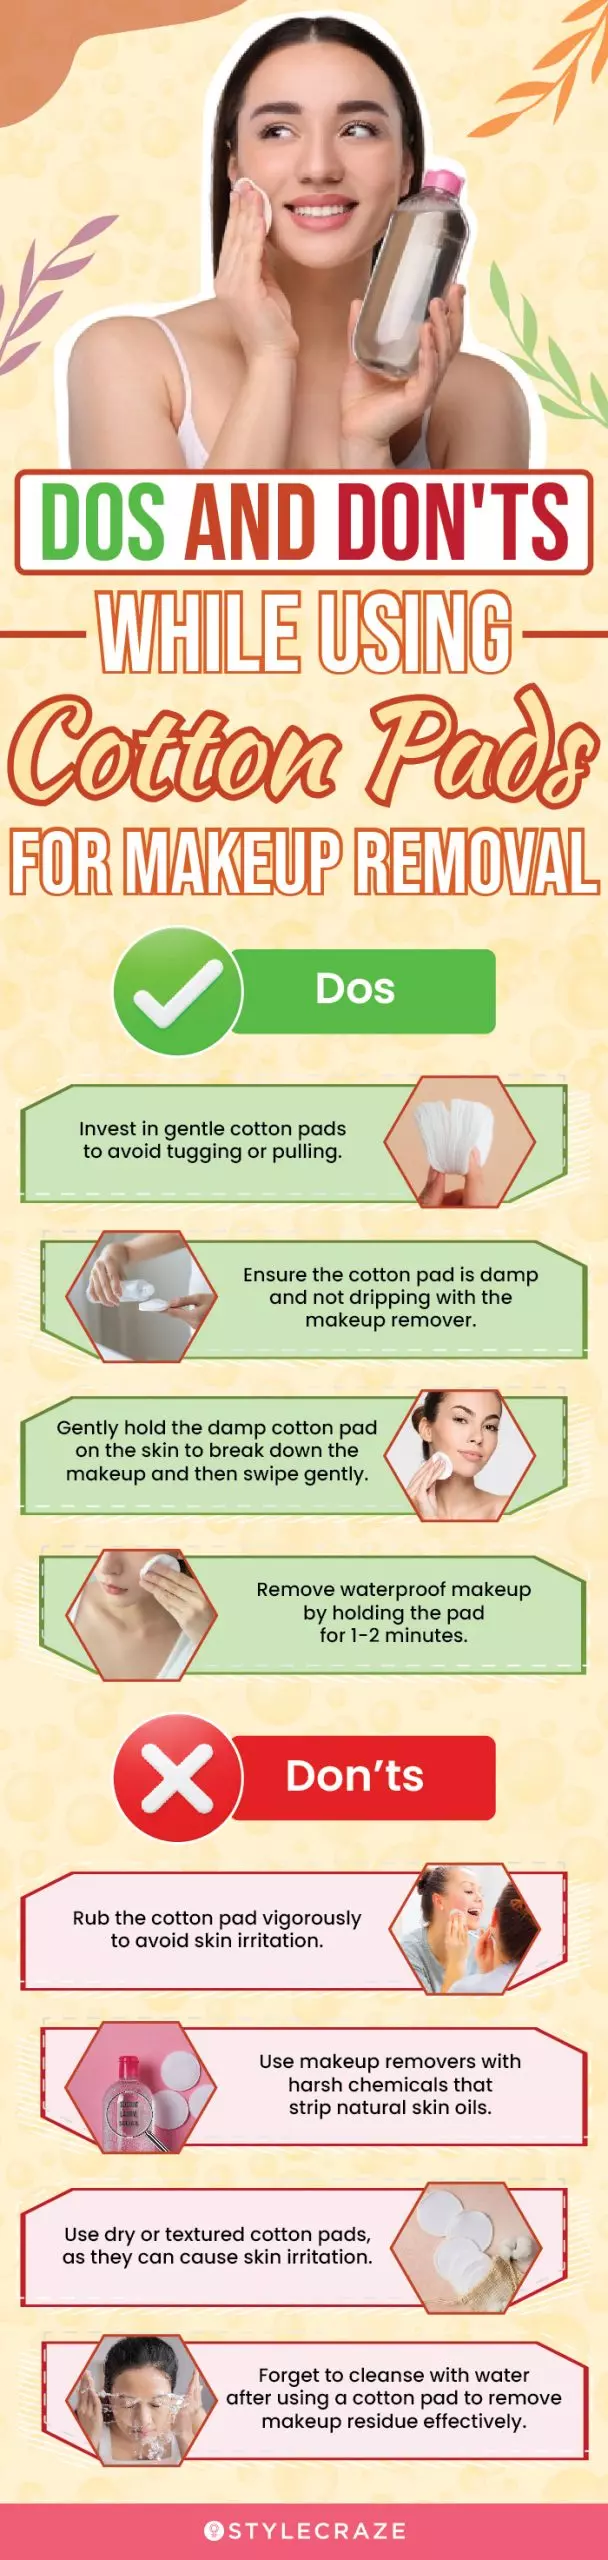 Dos And Don'ts While Using Cotton Pads For Makeup Removal (infographic)